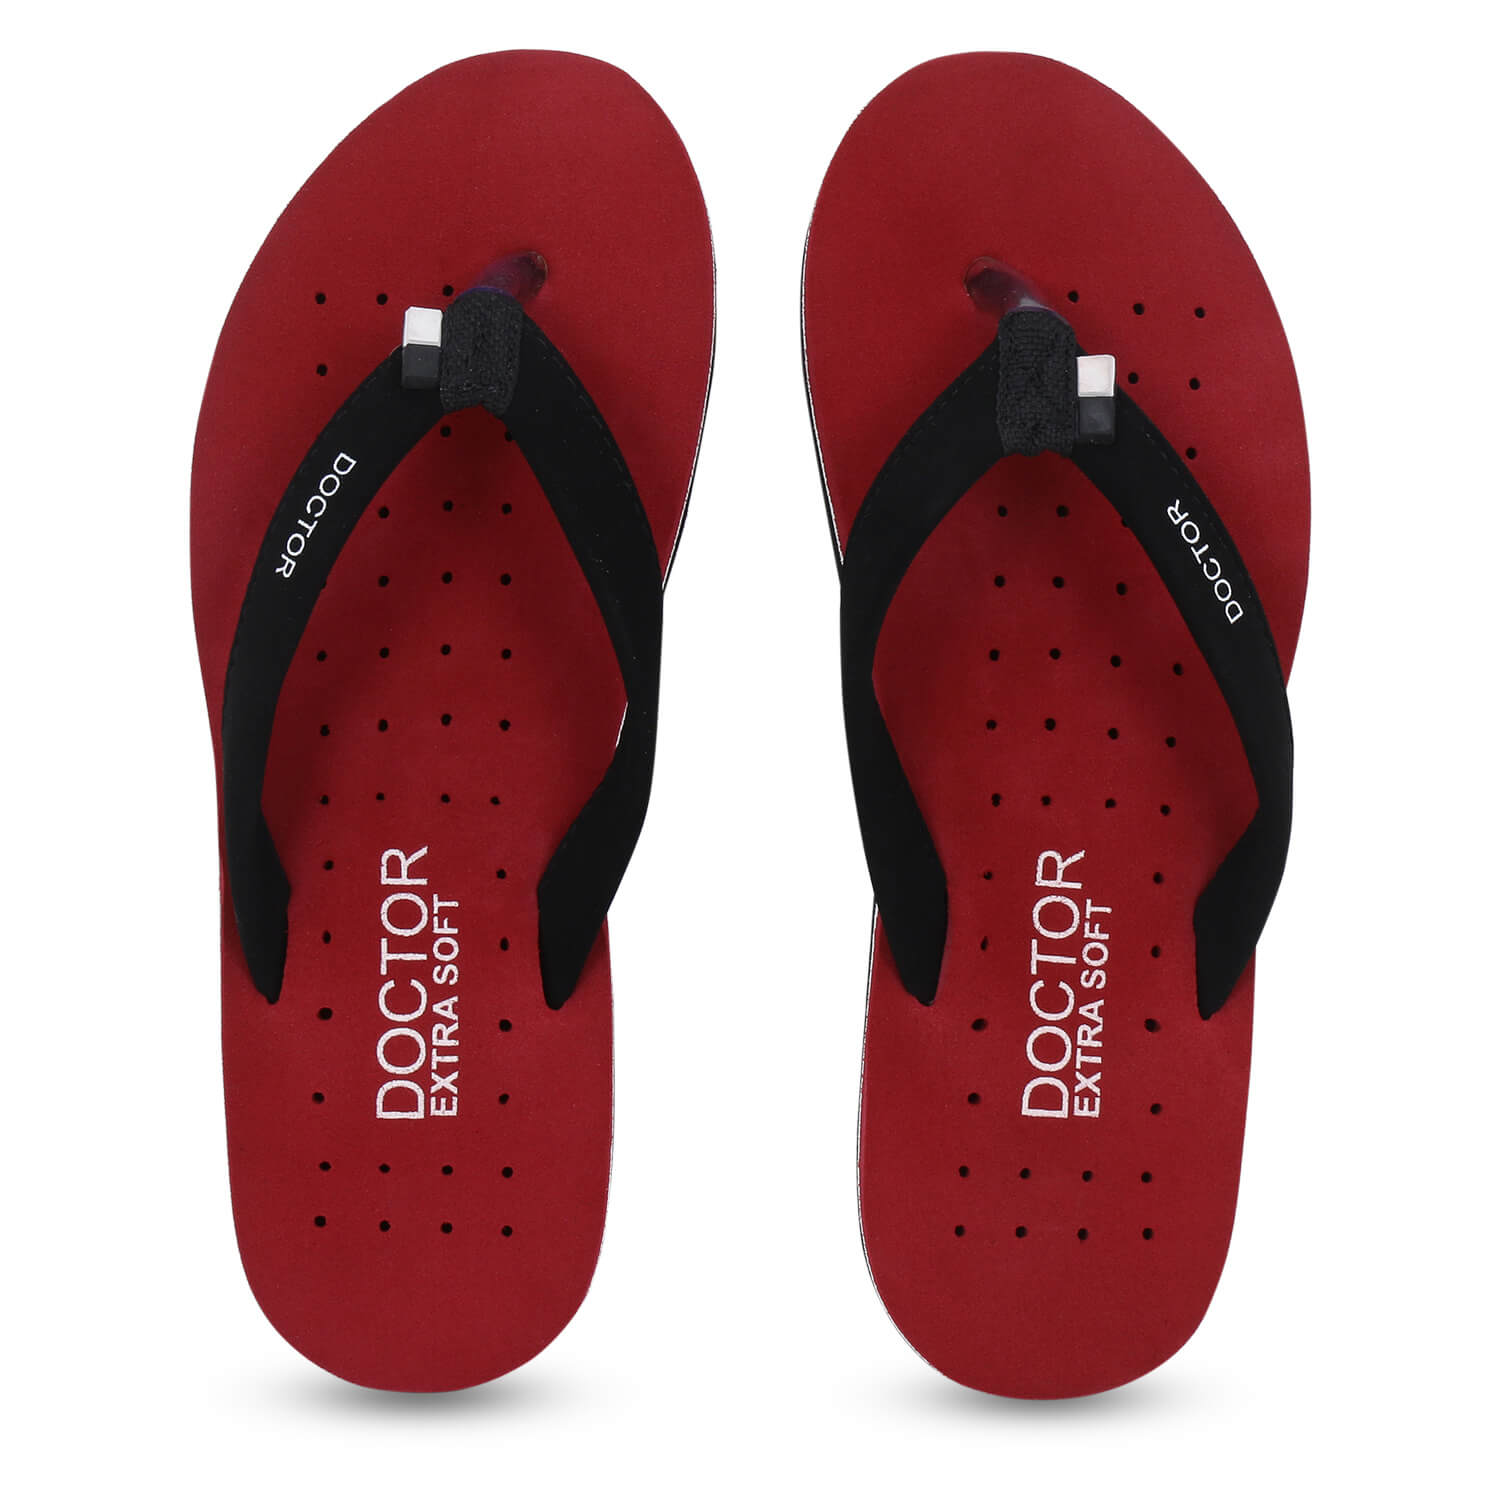 lockey women's doctor sole slipper at Best Price ₹ 495 with many options  Only in India at MartAvenue.com - Mart Avenue - MartAvenue